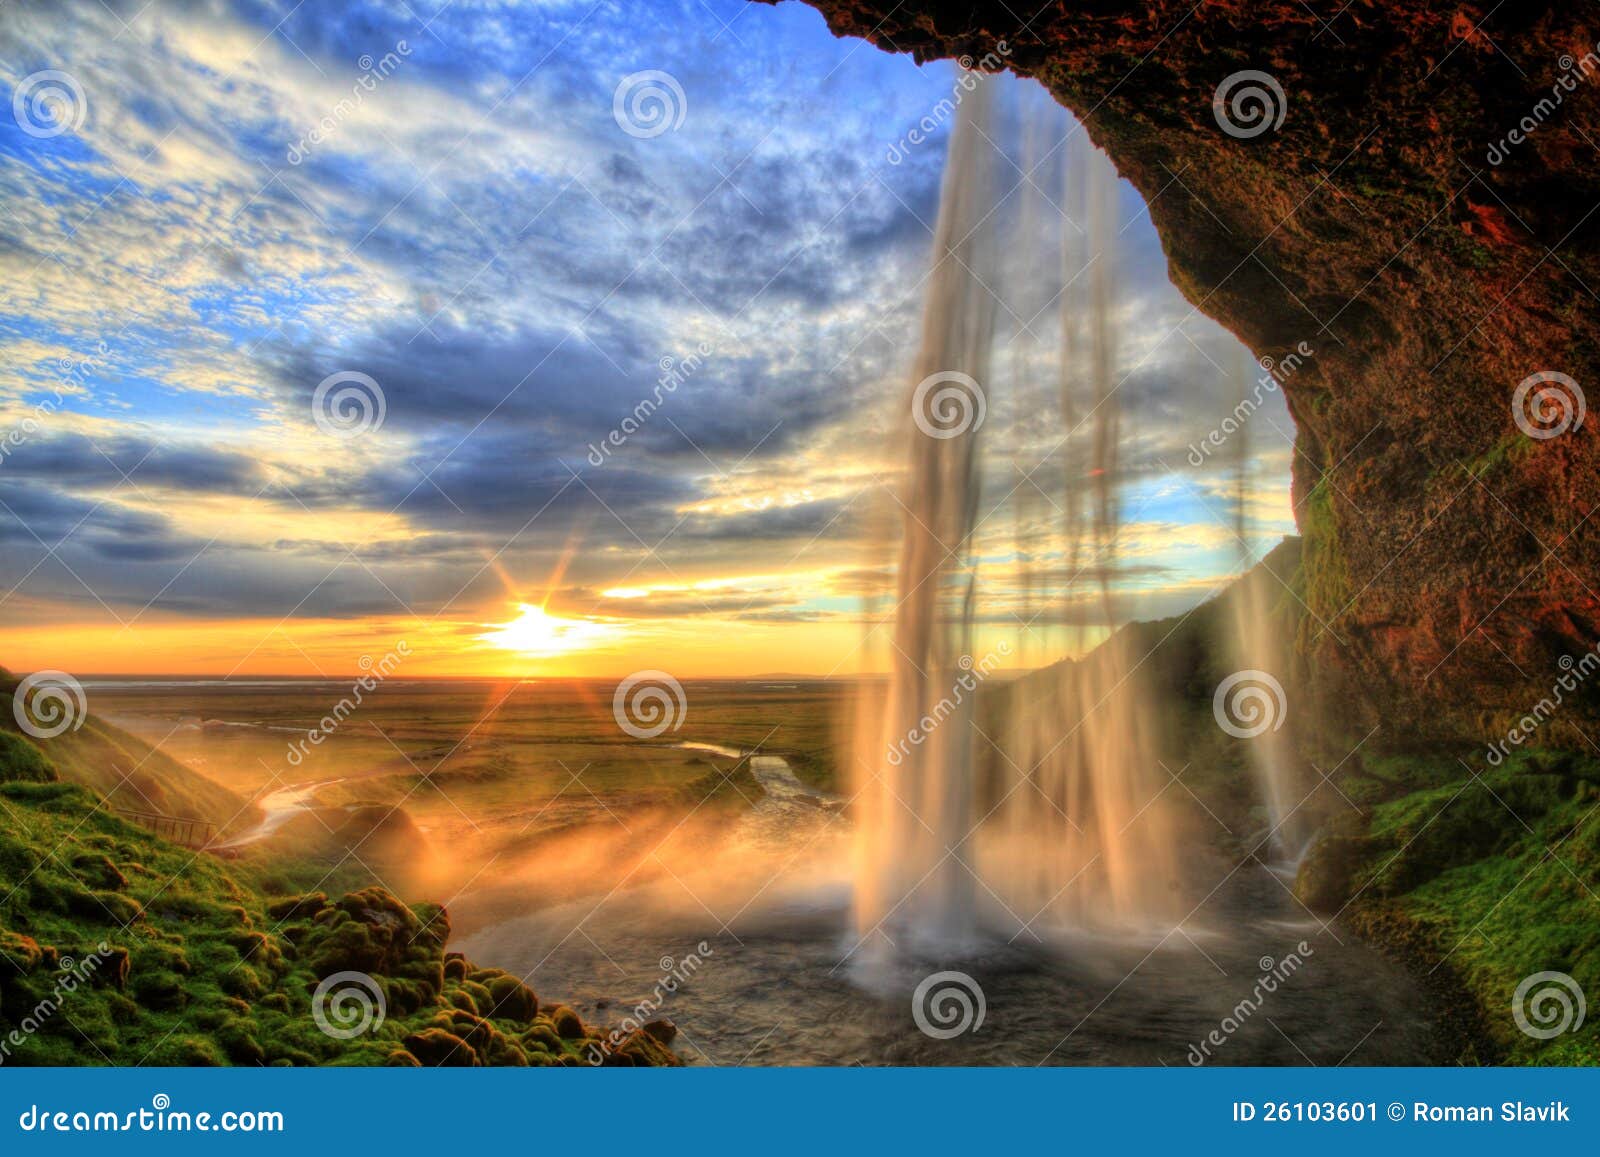 seljalandfoss waterfall at sunset in hdr, iceland